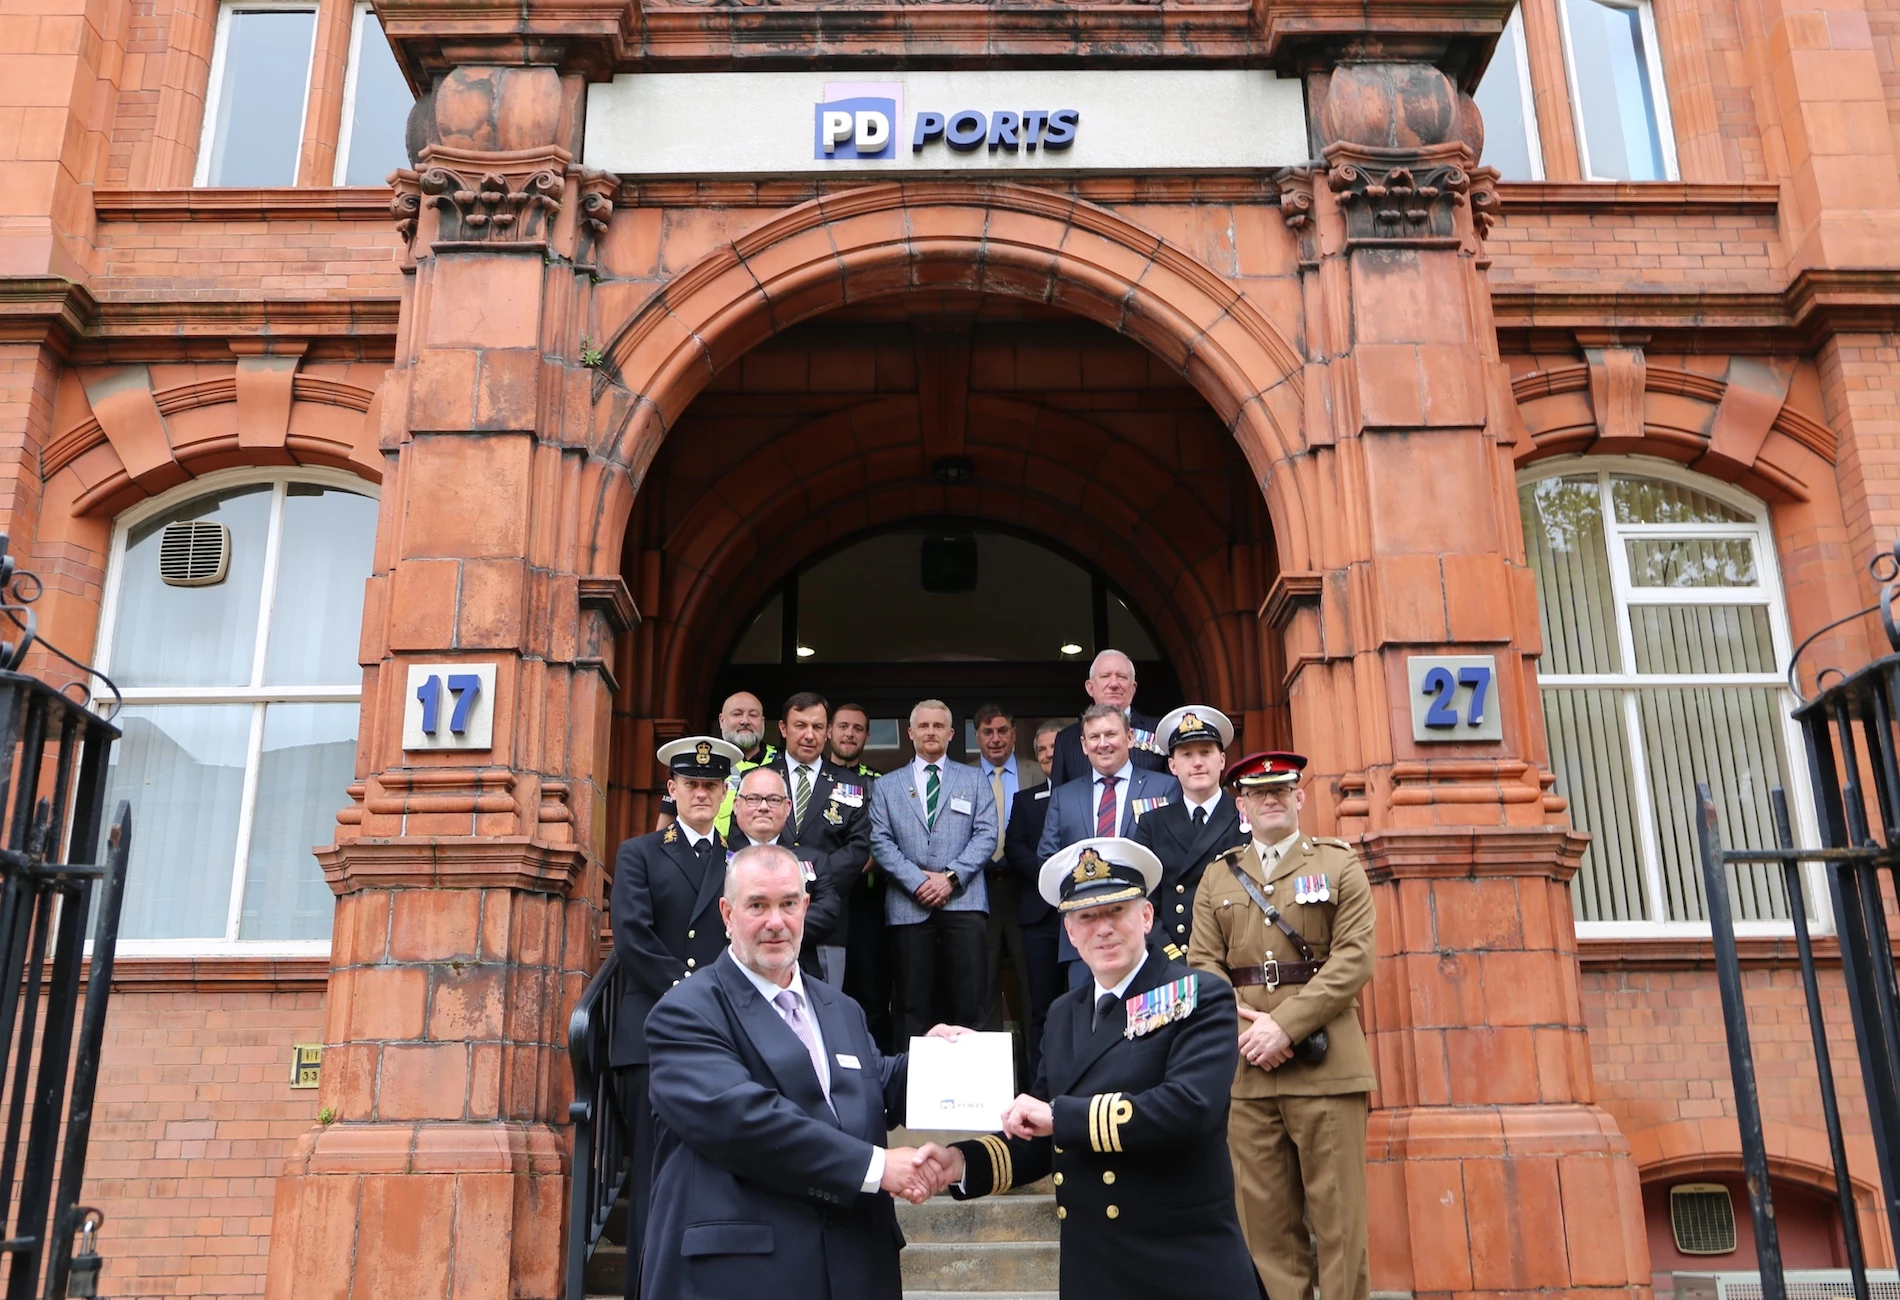 The Covenant was signed at PD Ports’ headquarters in Middlesbrough by Russ McCallion, PD Ports’ HR Director (front left) with Commander Ian Berry, HMS Calliope on behalf of the Ministry of Defence (front right).